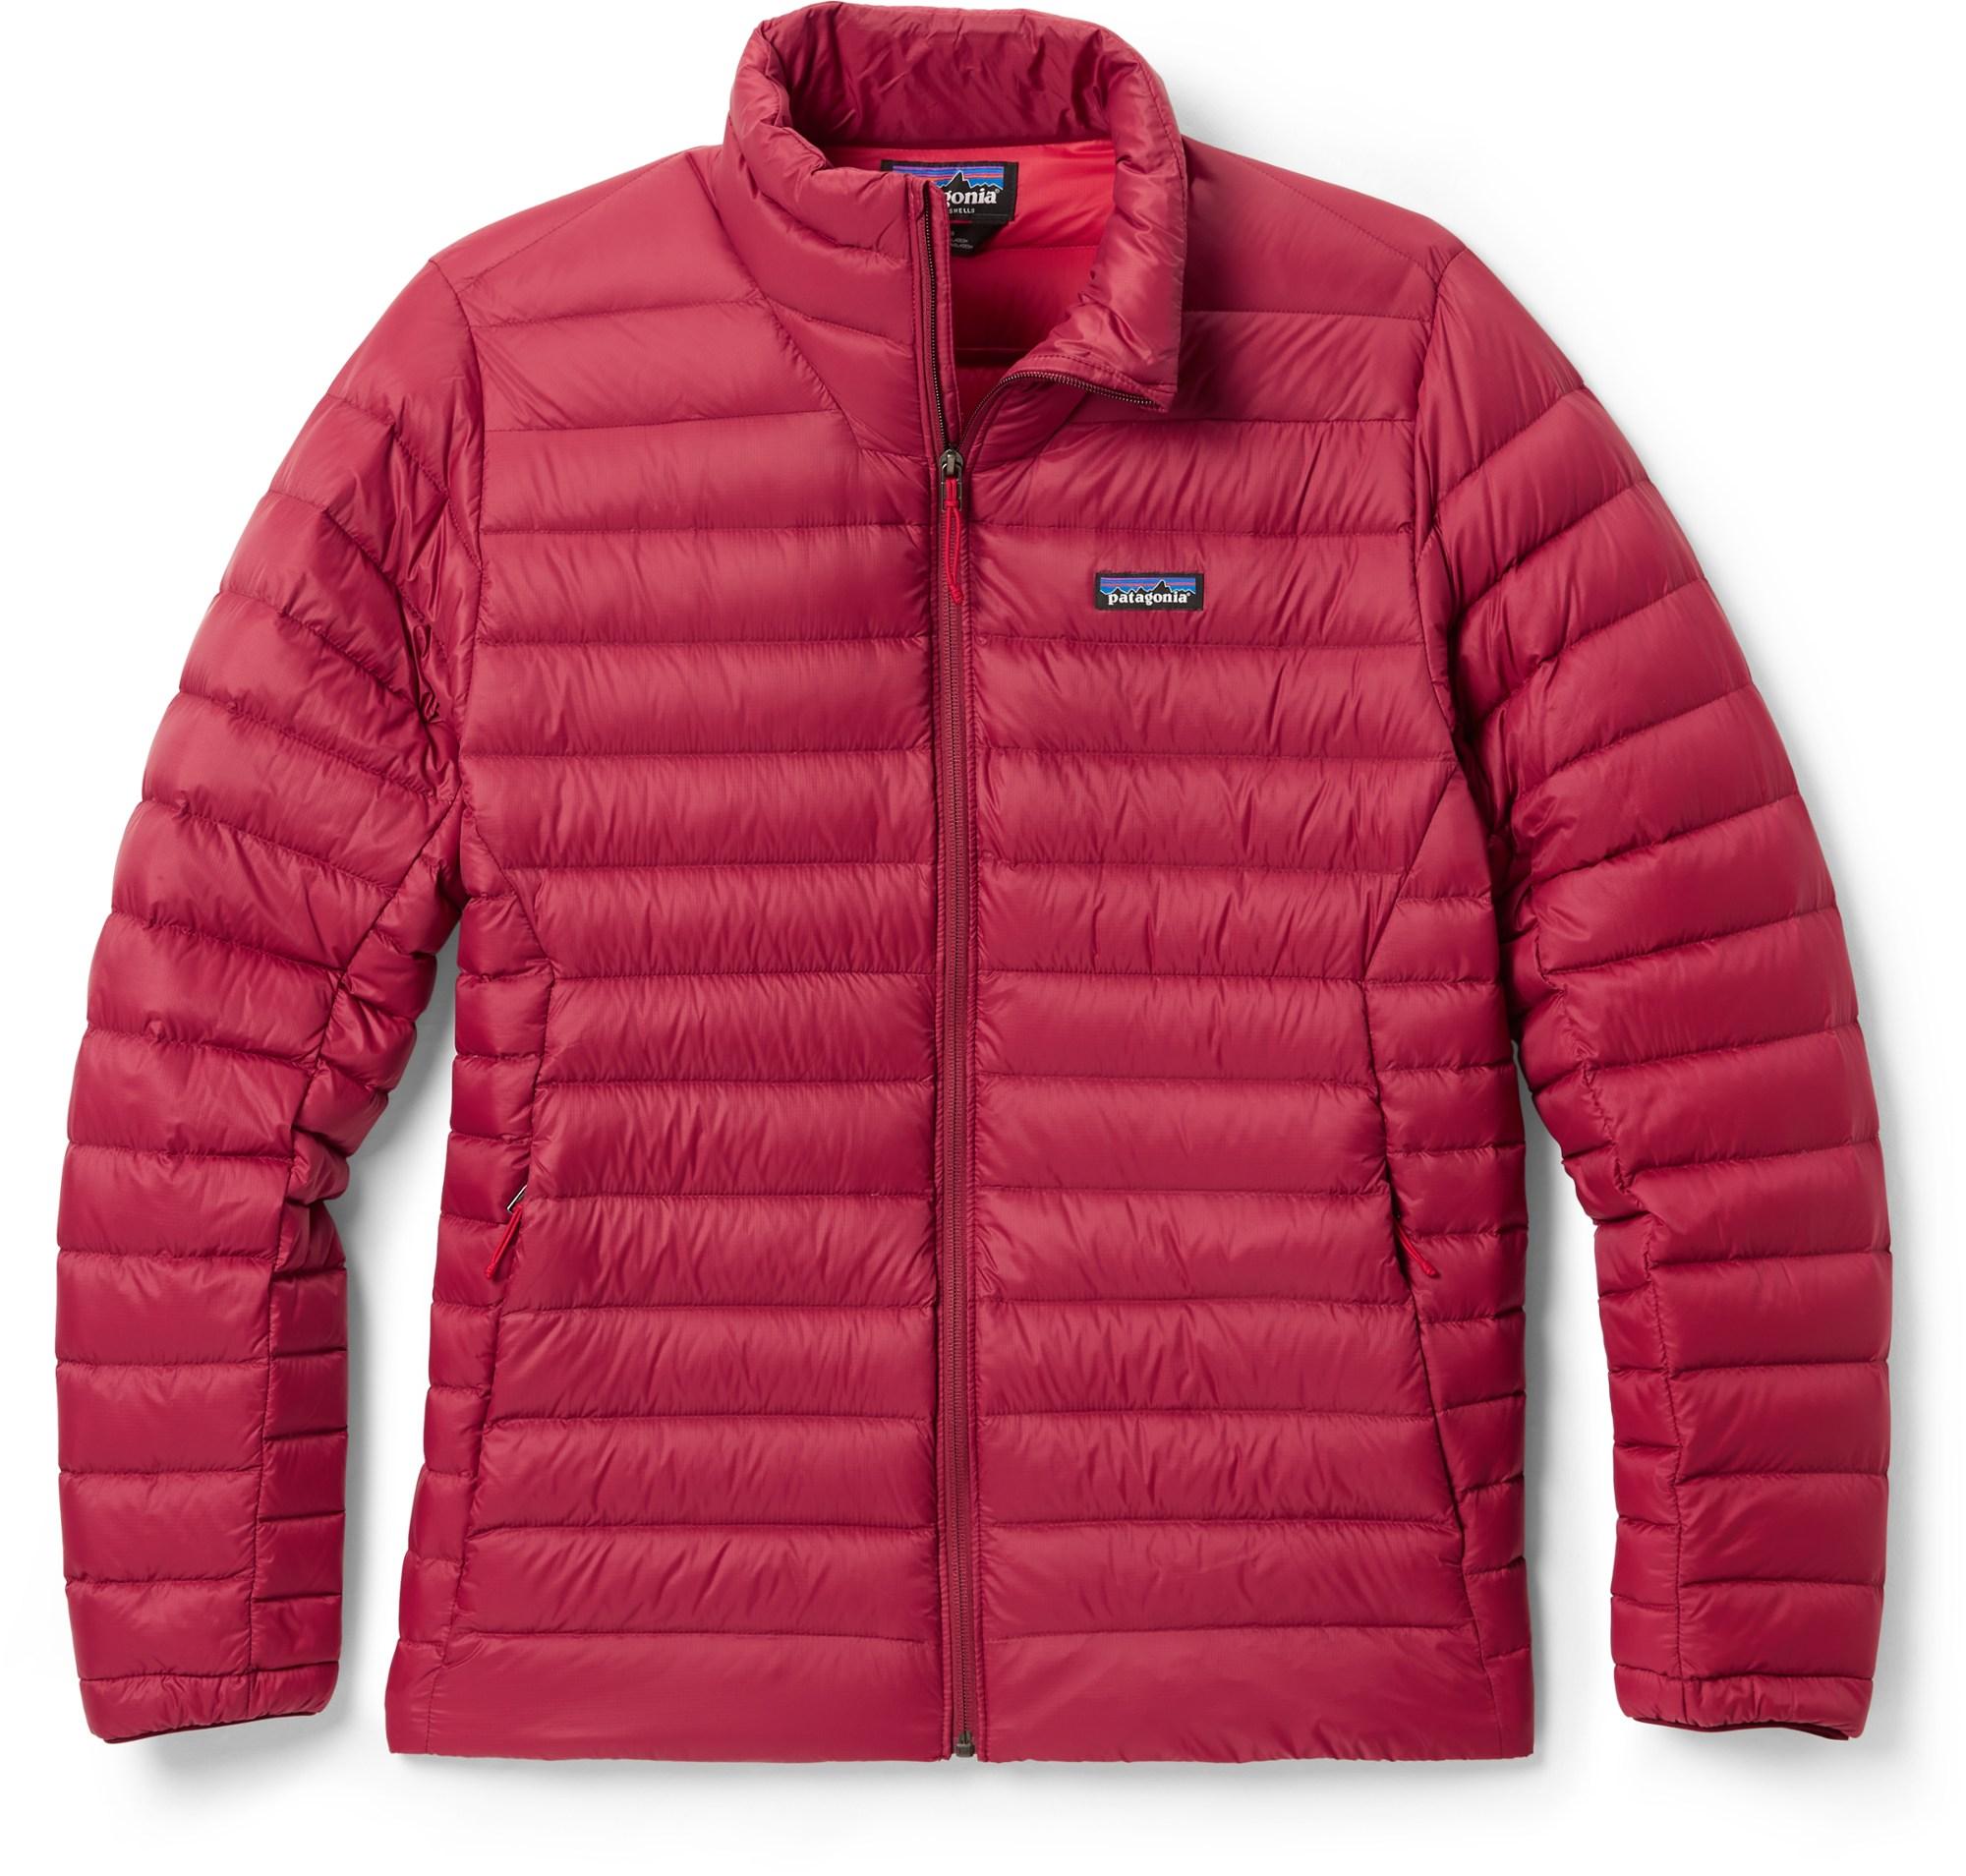 Patagonia Down Sweater Jacket for $138.83 Shipped